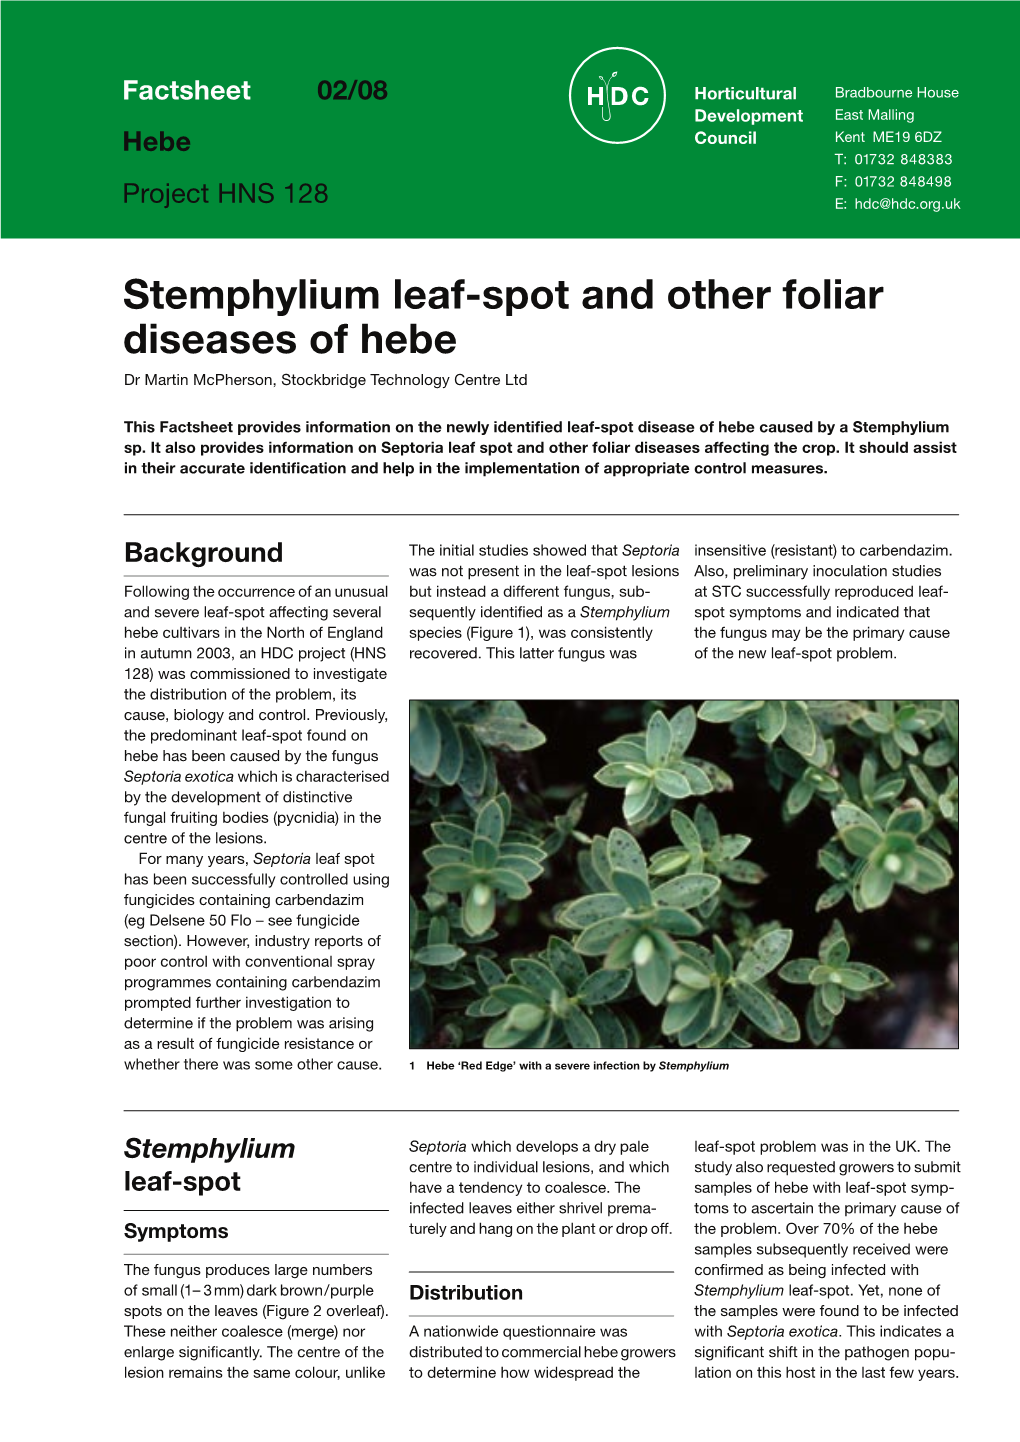 Stemphylium Leaf-Spot and Other Foliar Diseases of Hebe.Pdf